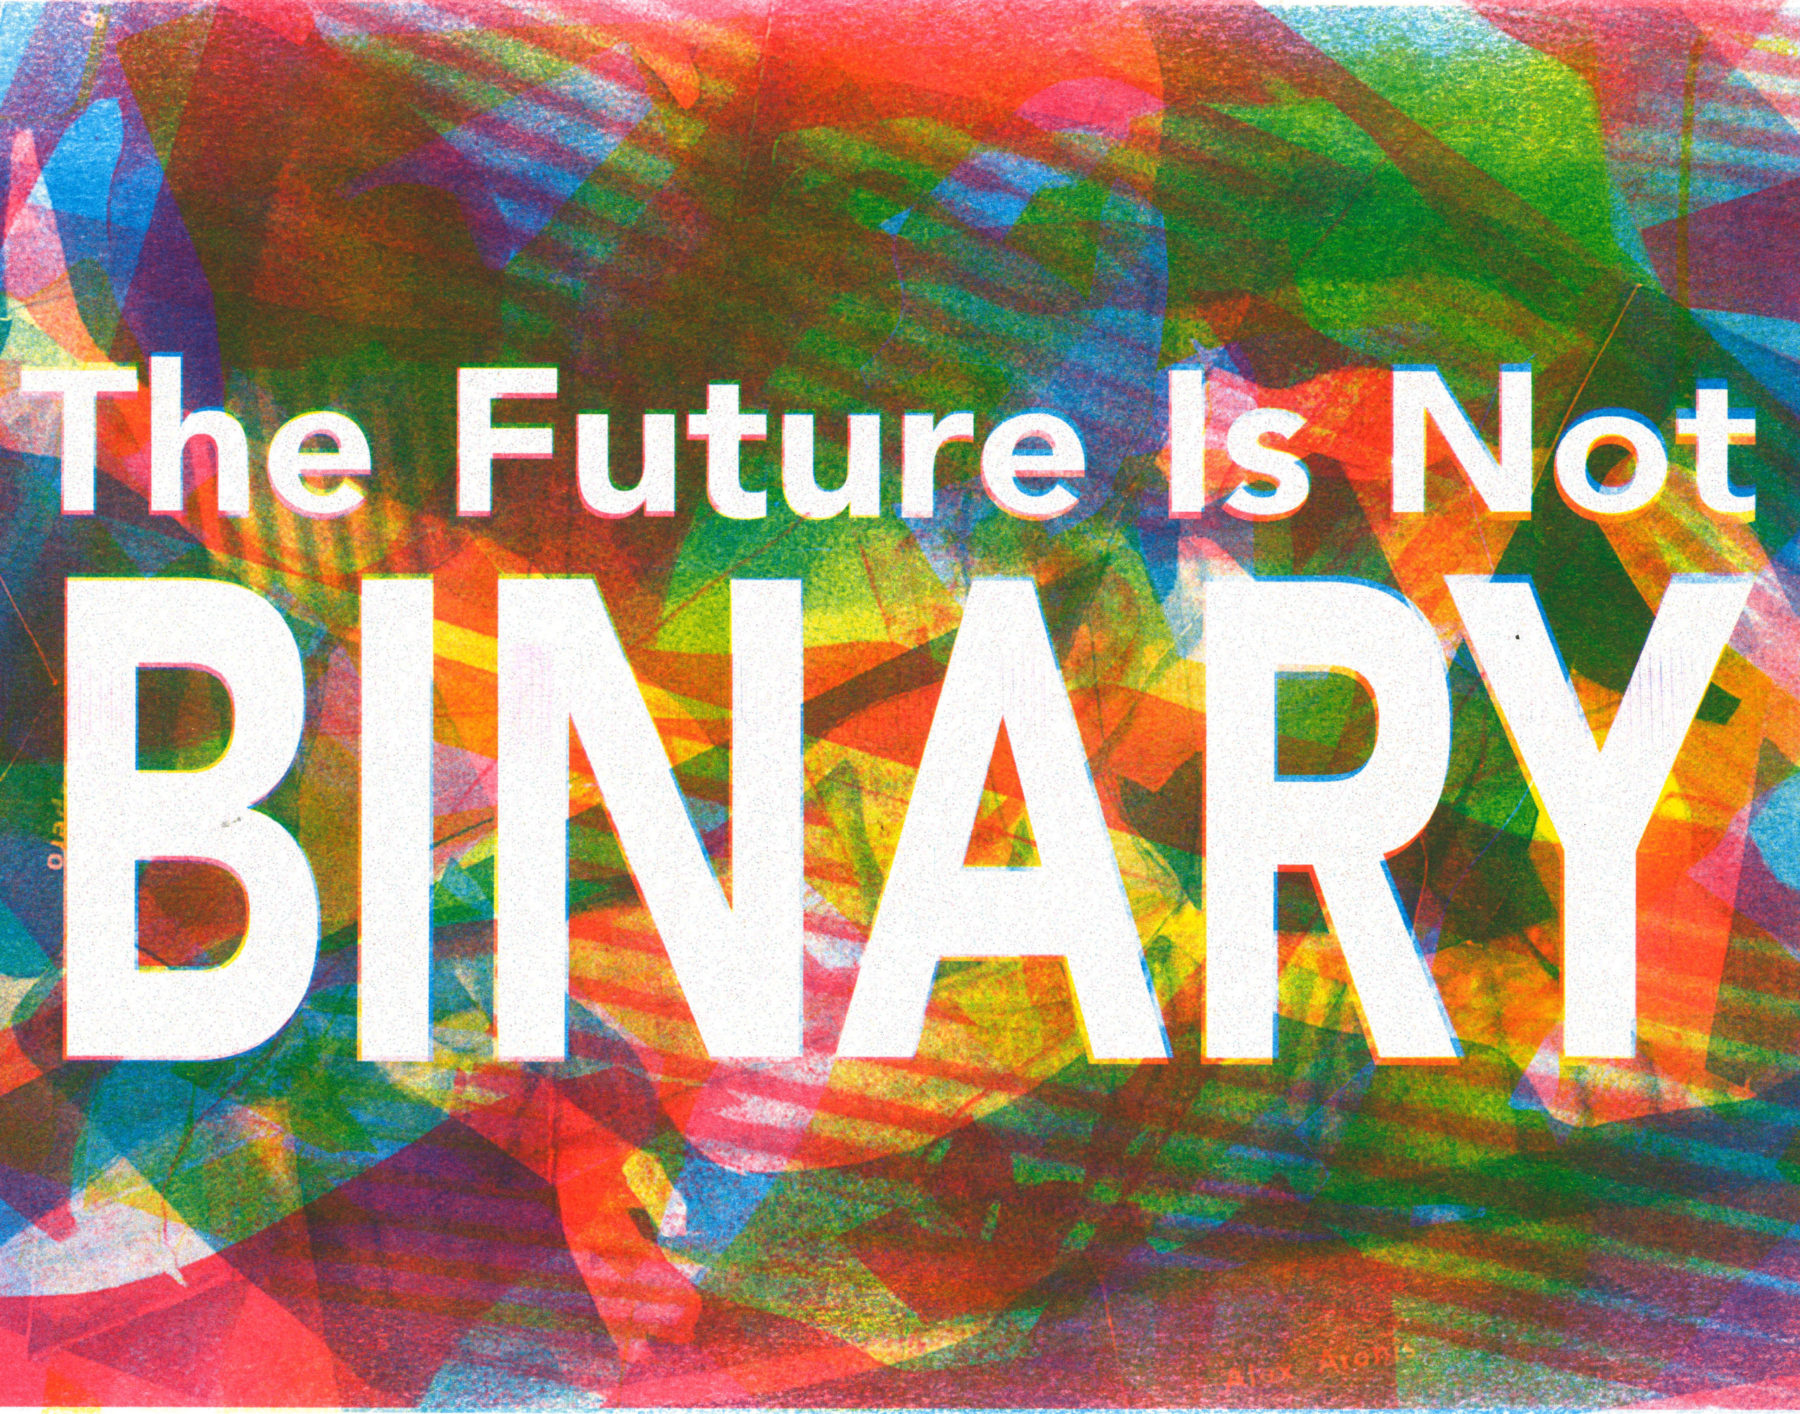 The Future is Not BINARY